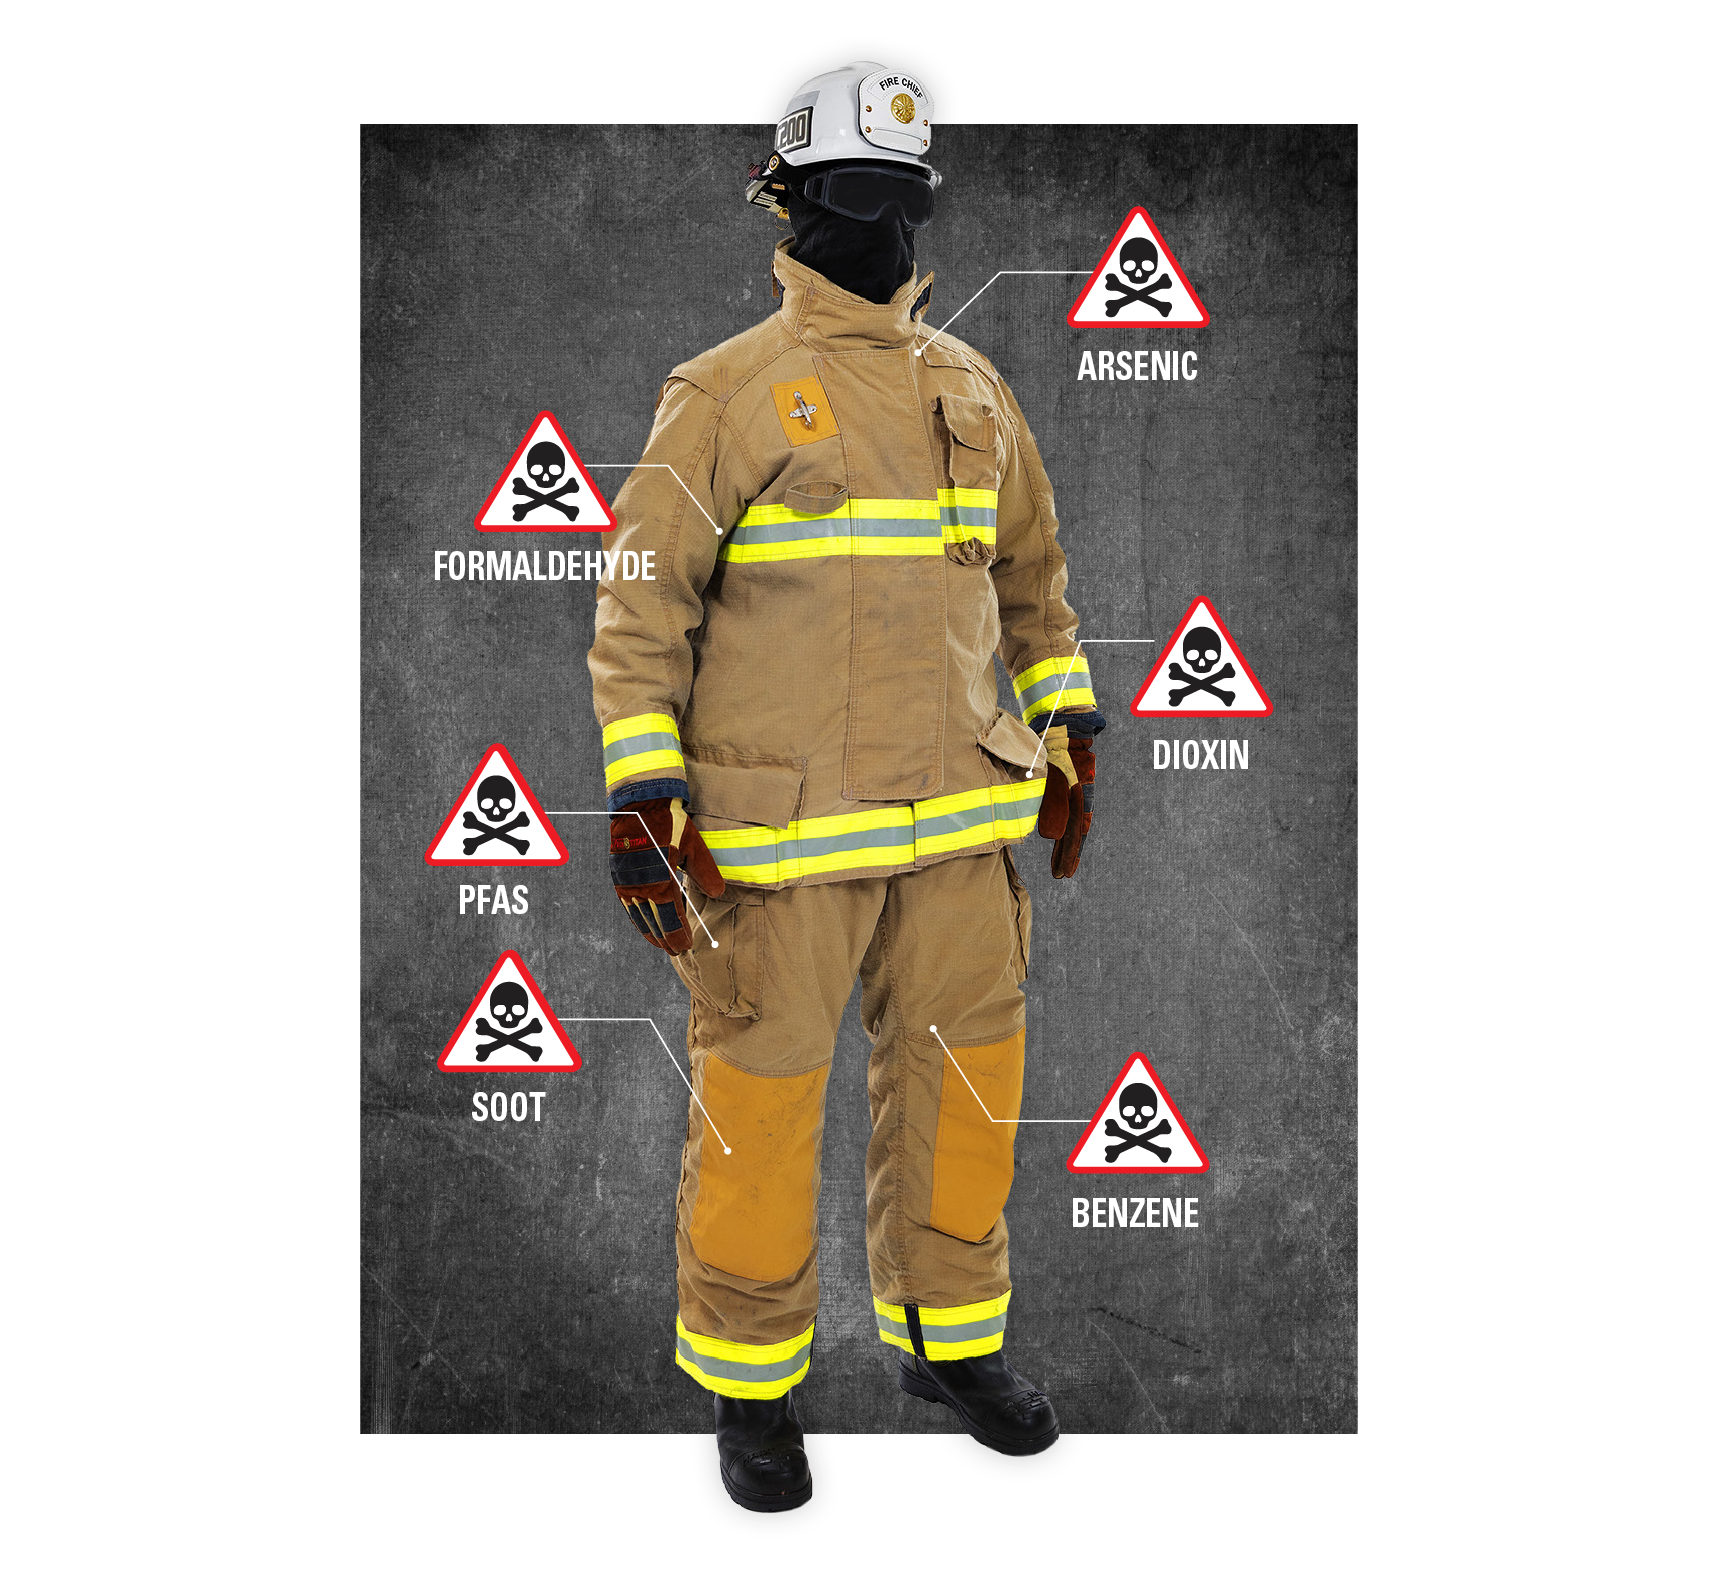 Graphic of fireman's turnout gear showing different contaminants encountered in fire fighting: formaldehyde, arsenic, soot, dioxin, benzene.